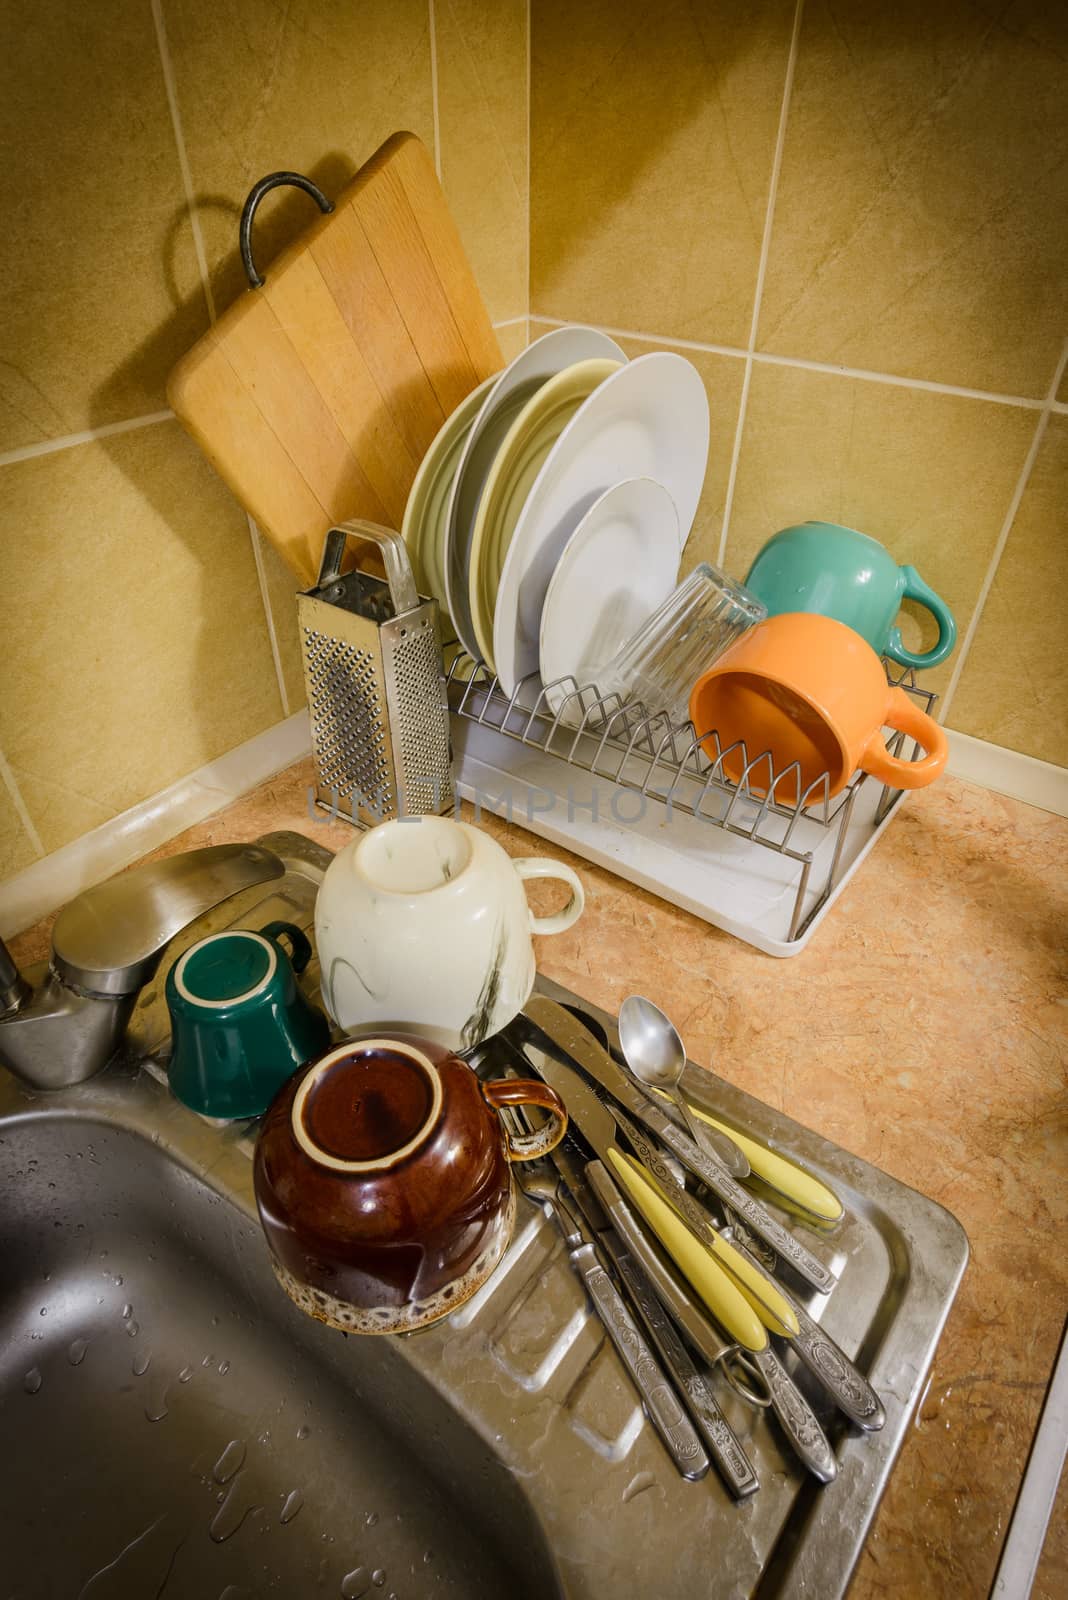 Dishes, cups, glasses, plates, forks, knives and spoons are drying close to the sink, after they have been washed in kitchen